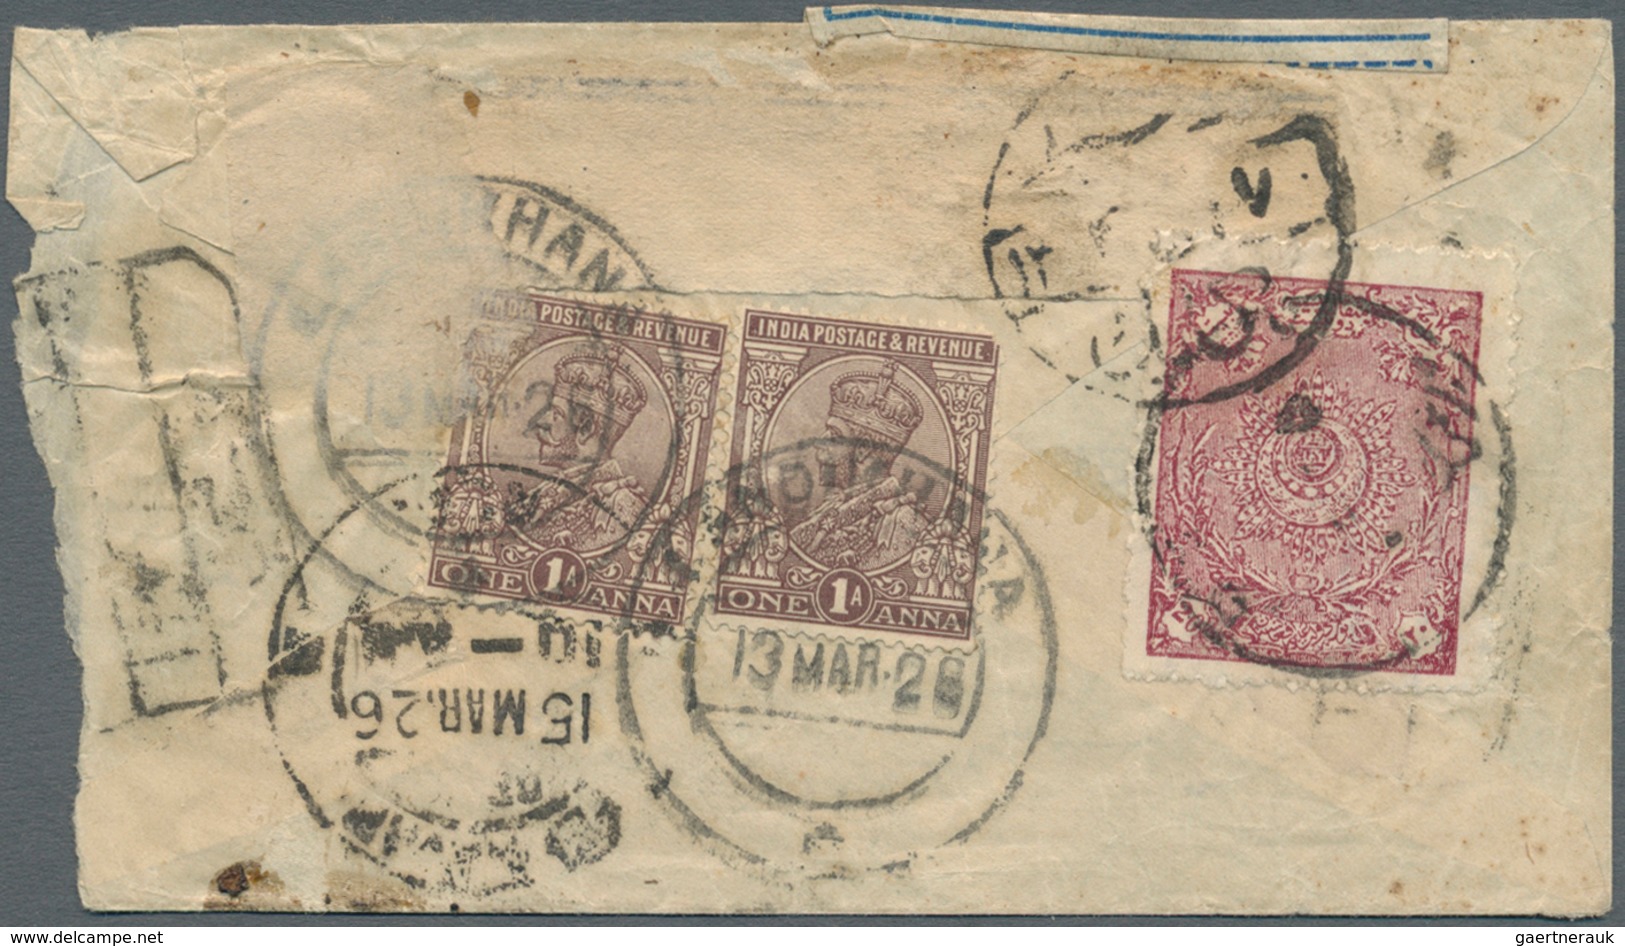 22153 Afghanistan: 1909-1928: Collection of 19 pre-UPU covers to India, from the Kabul region via the nort